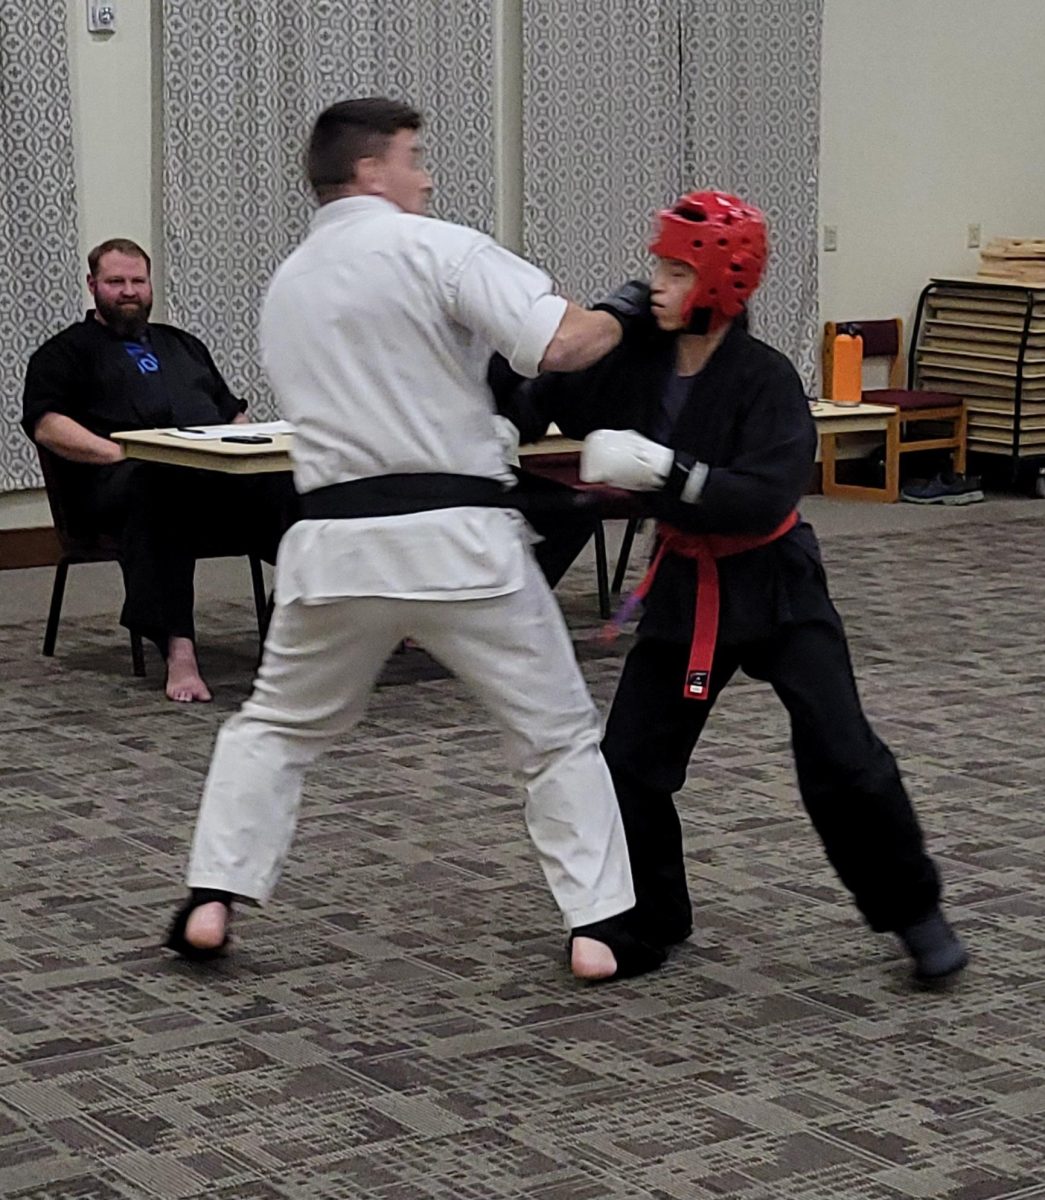 Discovering Personal Growth: The Diverse Journeys and Benefits of Practicing Martial Arts